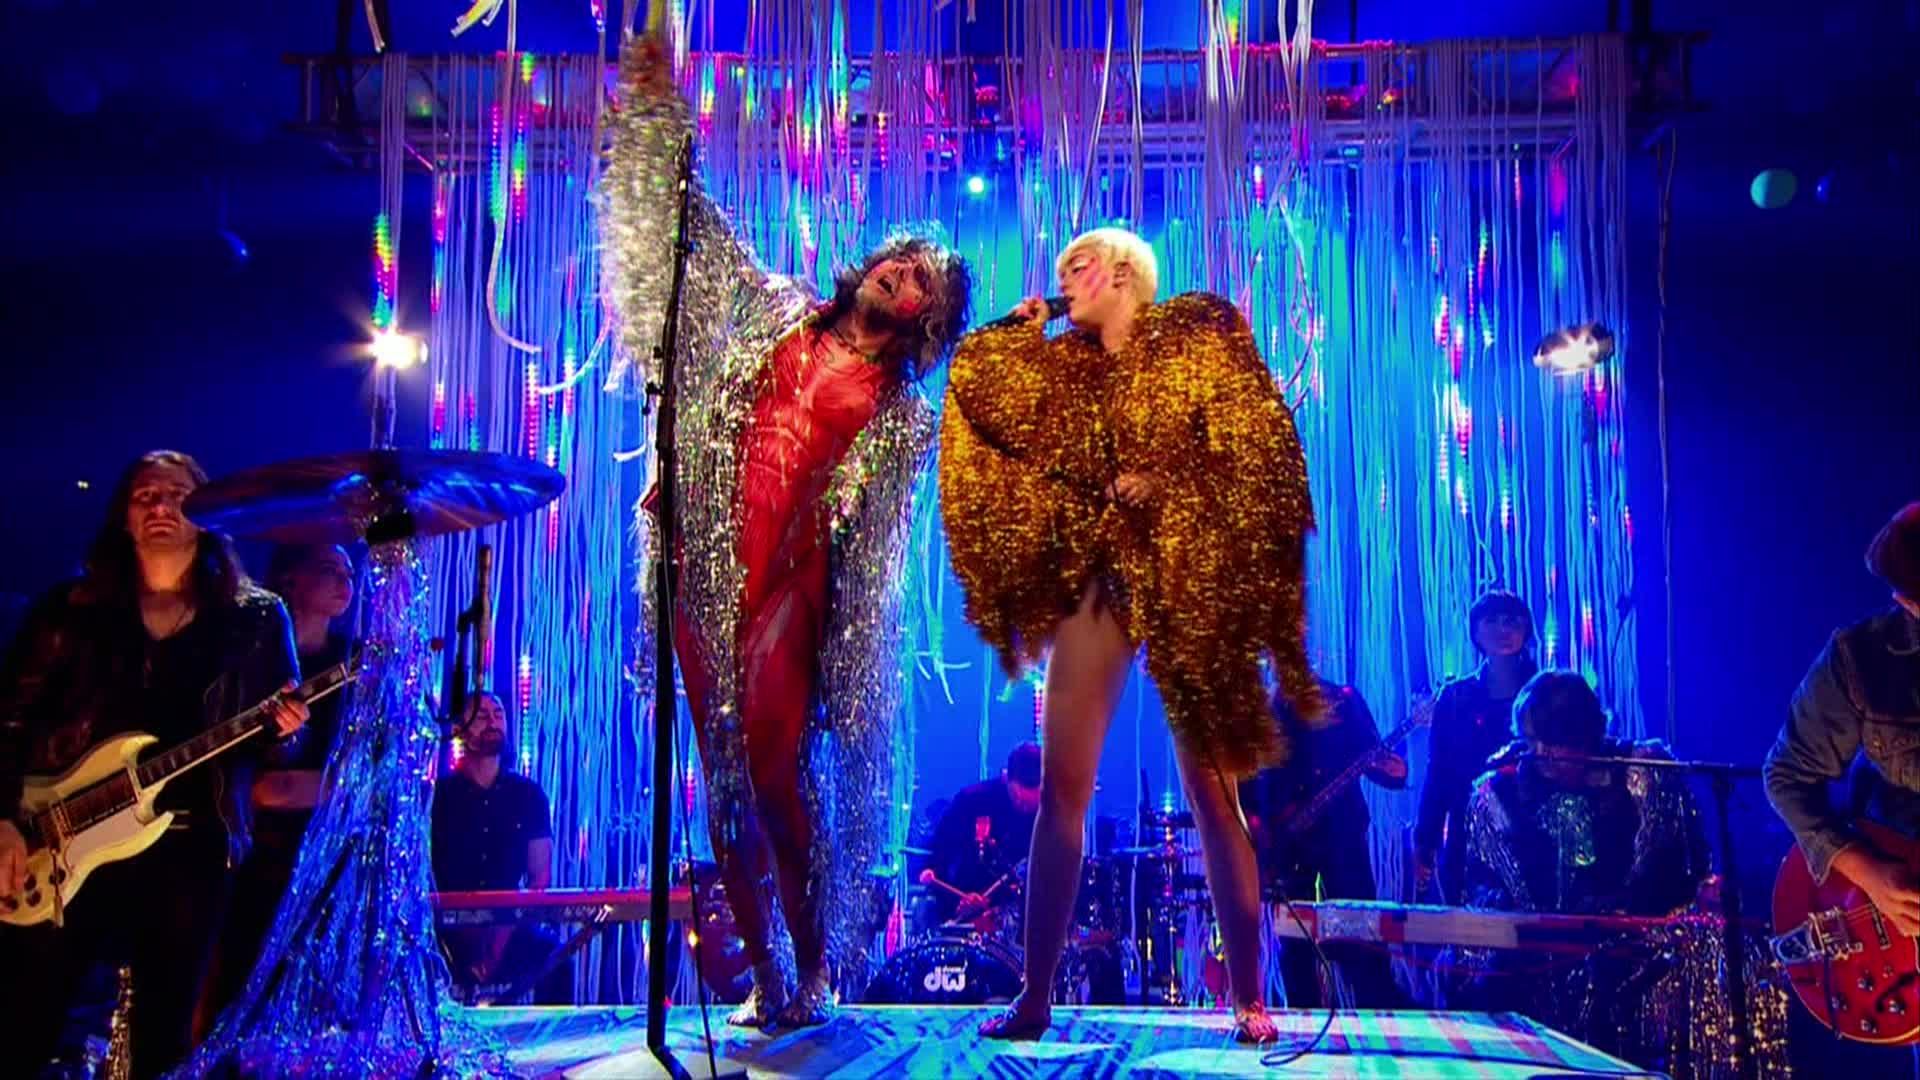 Miley Cyrus [ft The Flaming Lips] - 2014-05-18, Billboard Music Awards - 1080 TS - LSD preview 4